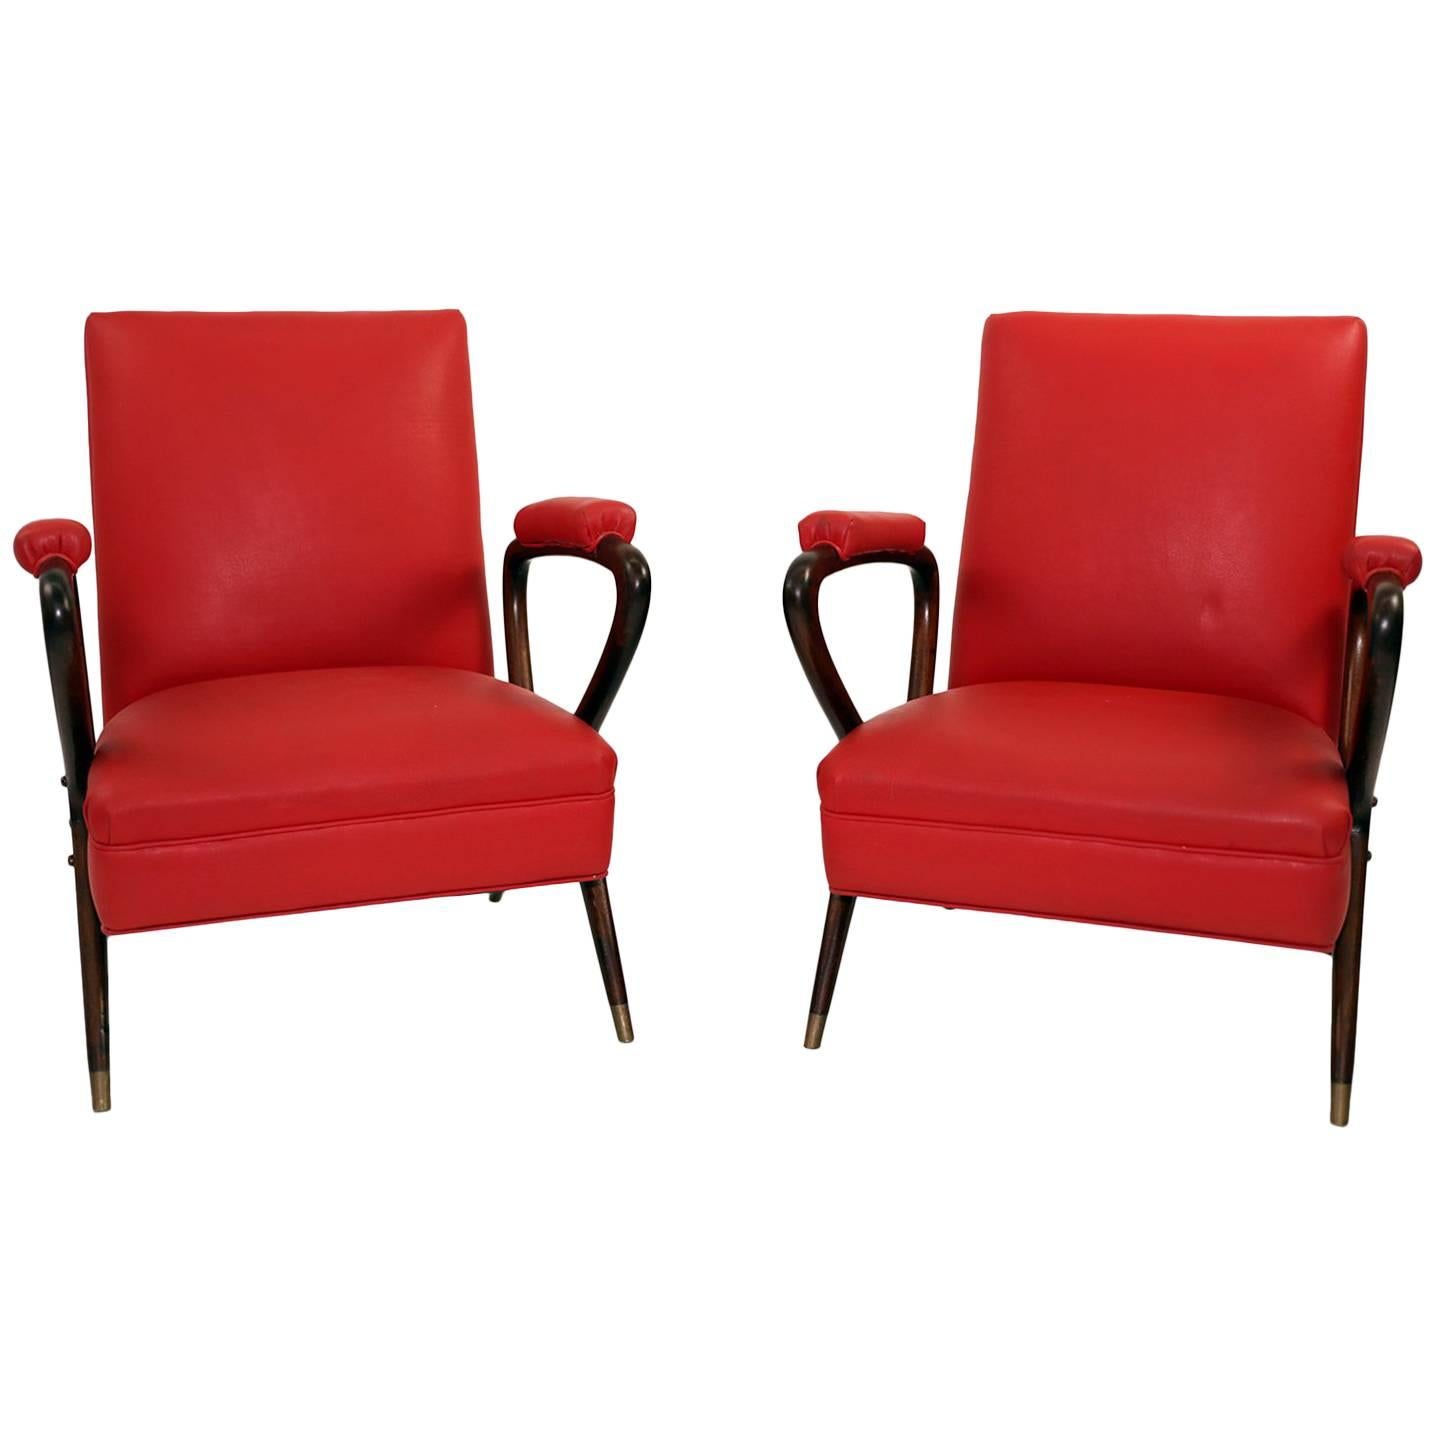 Pair of Mid-Century Modern Italian Mahogany Chairs in the Manner of Ico Parisi